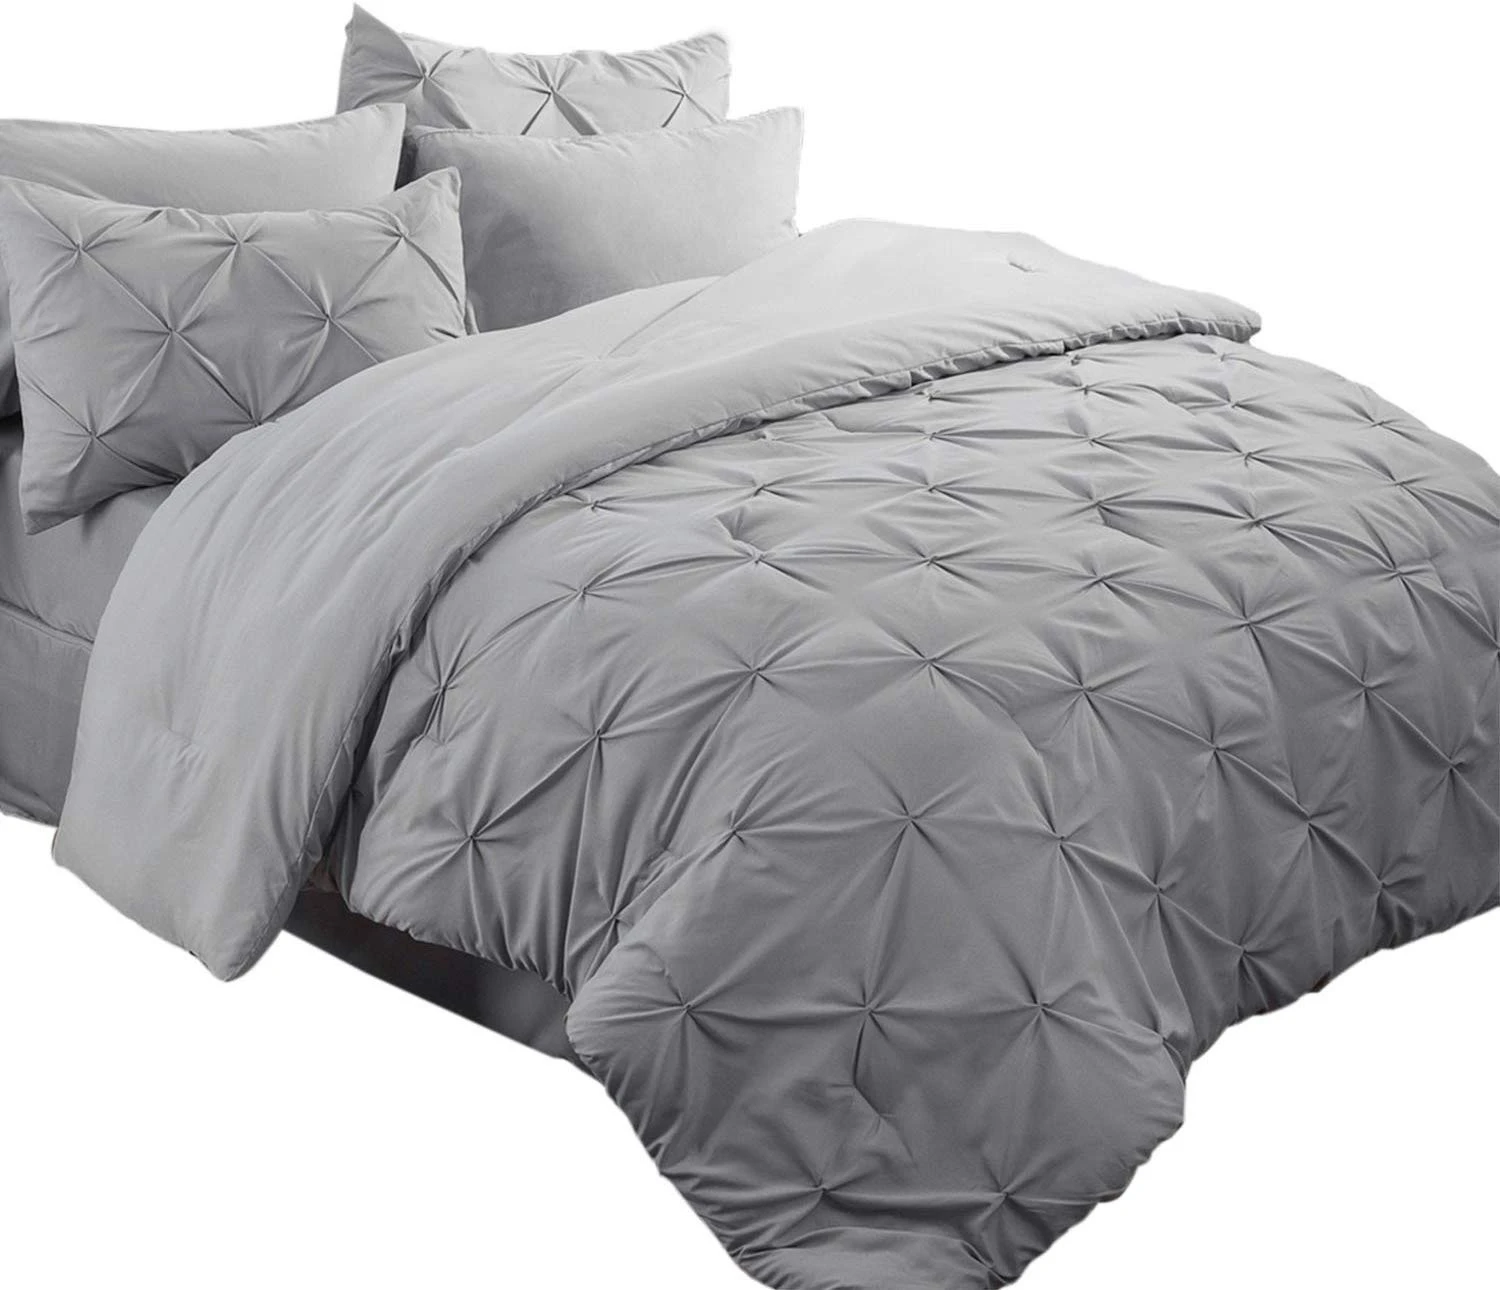 Luxury Solid Grey Pinch Pleat Down Alternative King Size Queen Size Duvet Cover Comforter Cover Pillowcase Bed Set